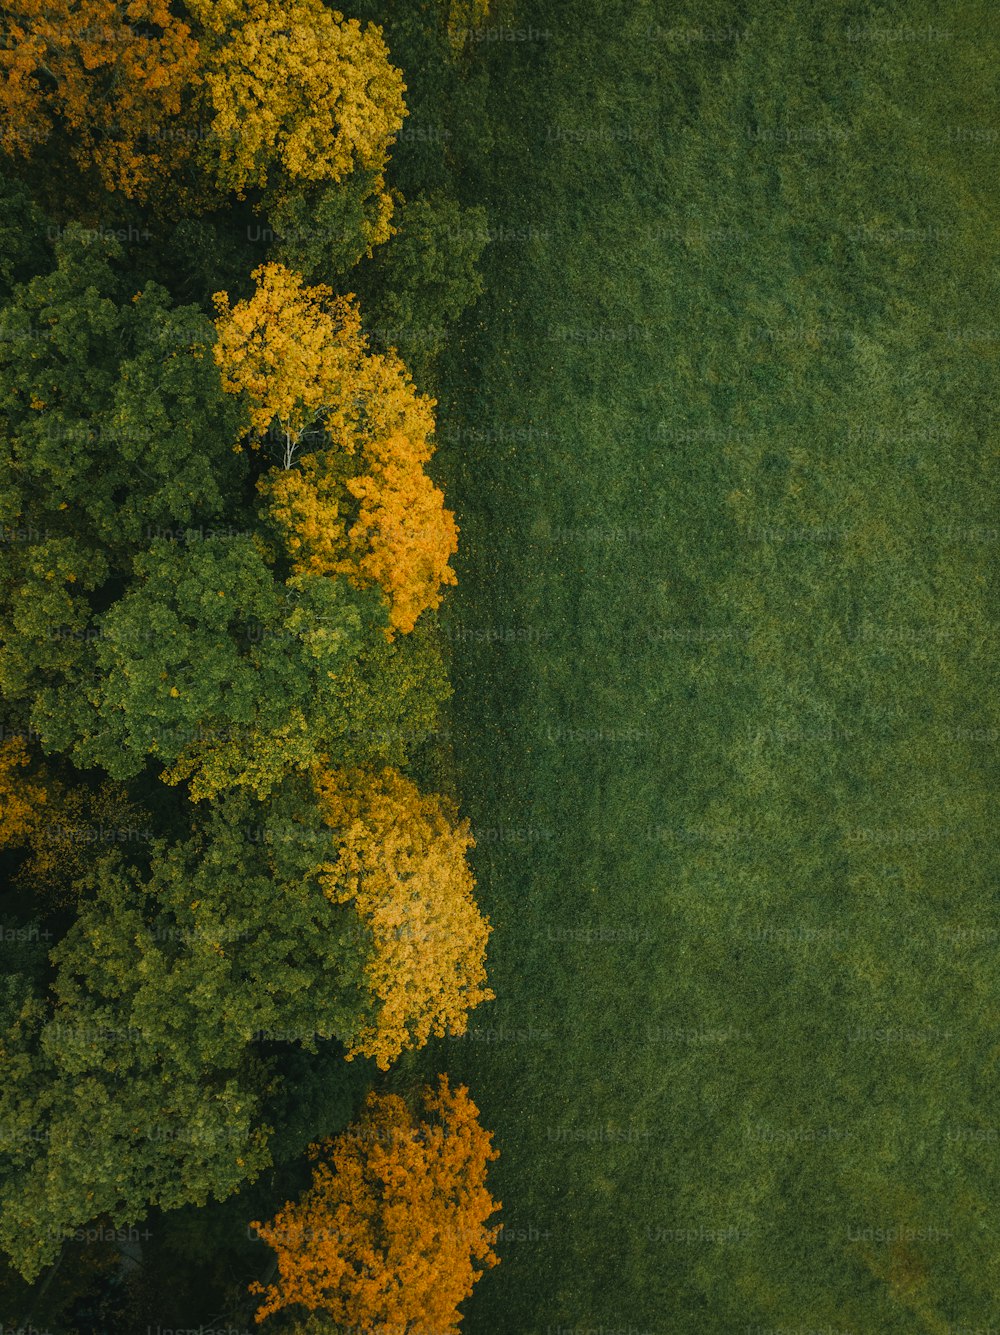 an aerial view of a grassy field with trees in the background